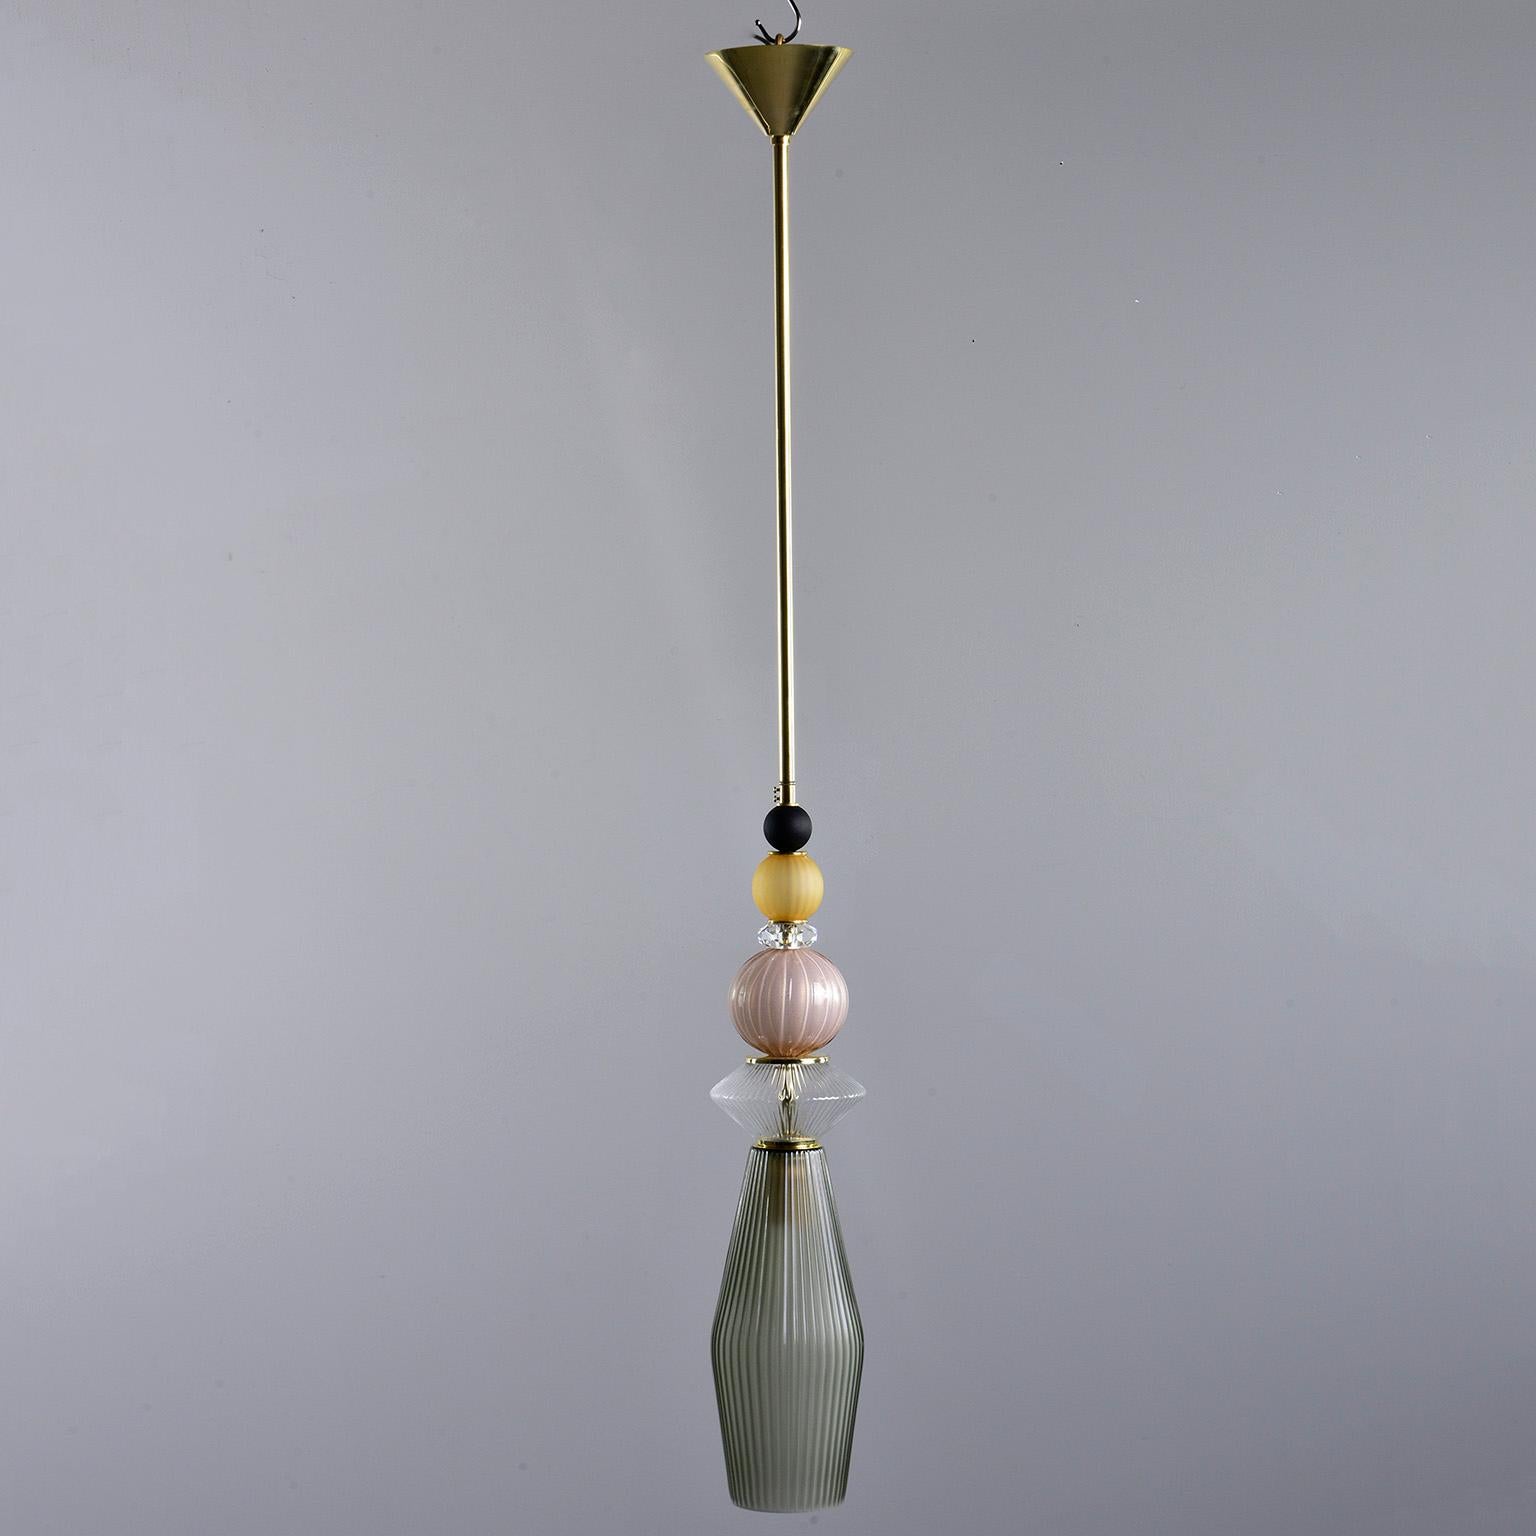 Pair of circa 2010 pendant lights made of multi-color Murano glass elements with brass rods and canopy. New wiring for US electrical standards. Sold and priced as a pair.